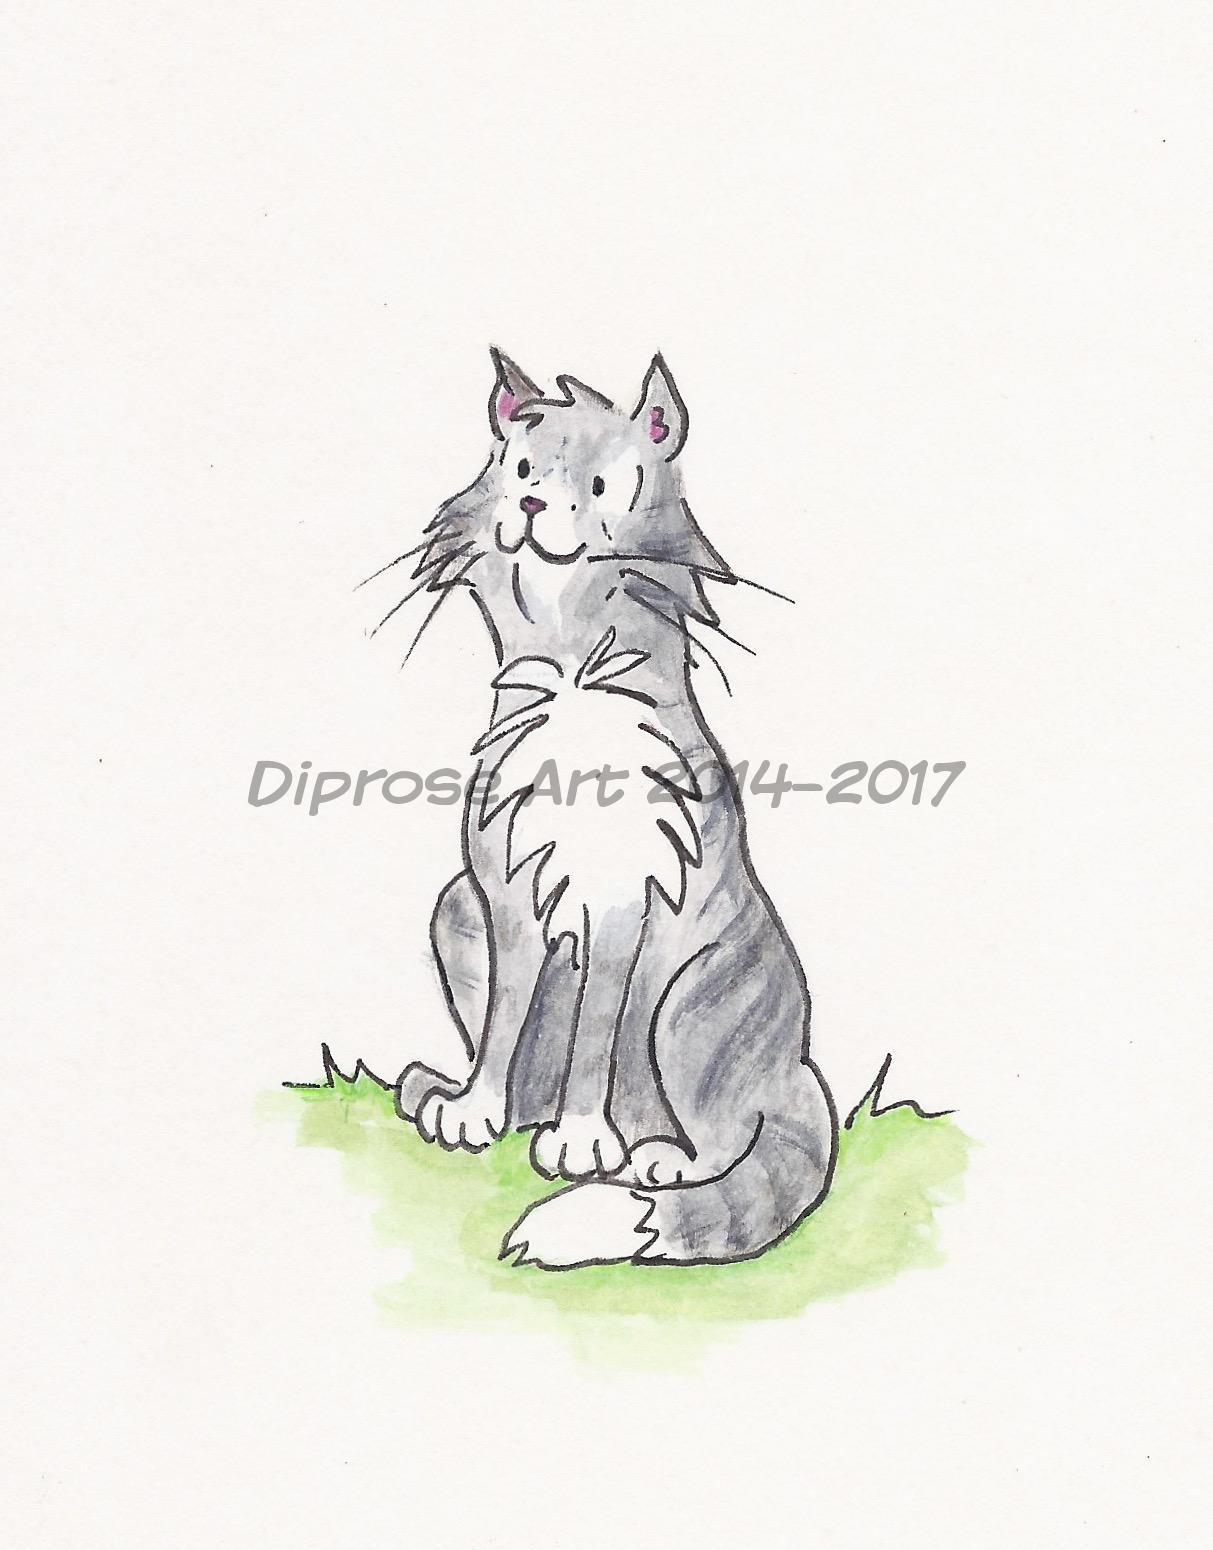 cartoons done to illustrate a veterinary brochure - this is the basic cat